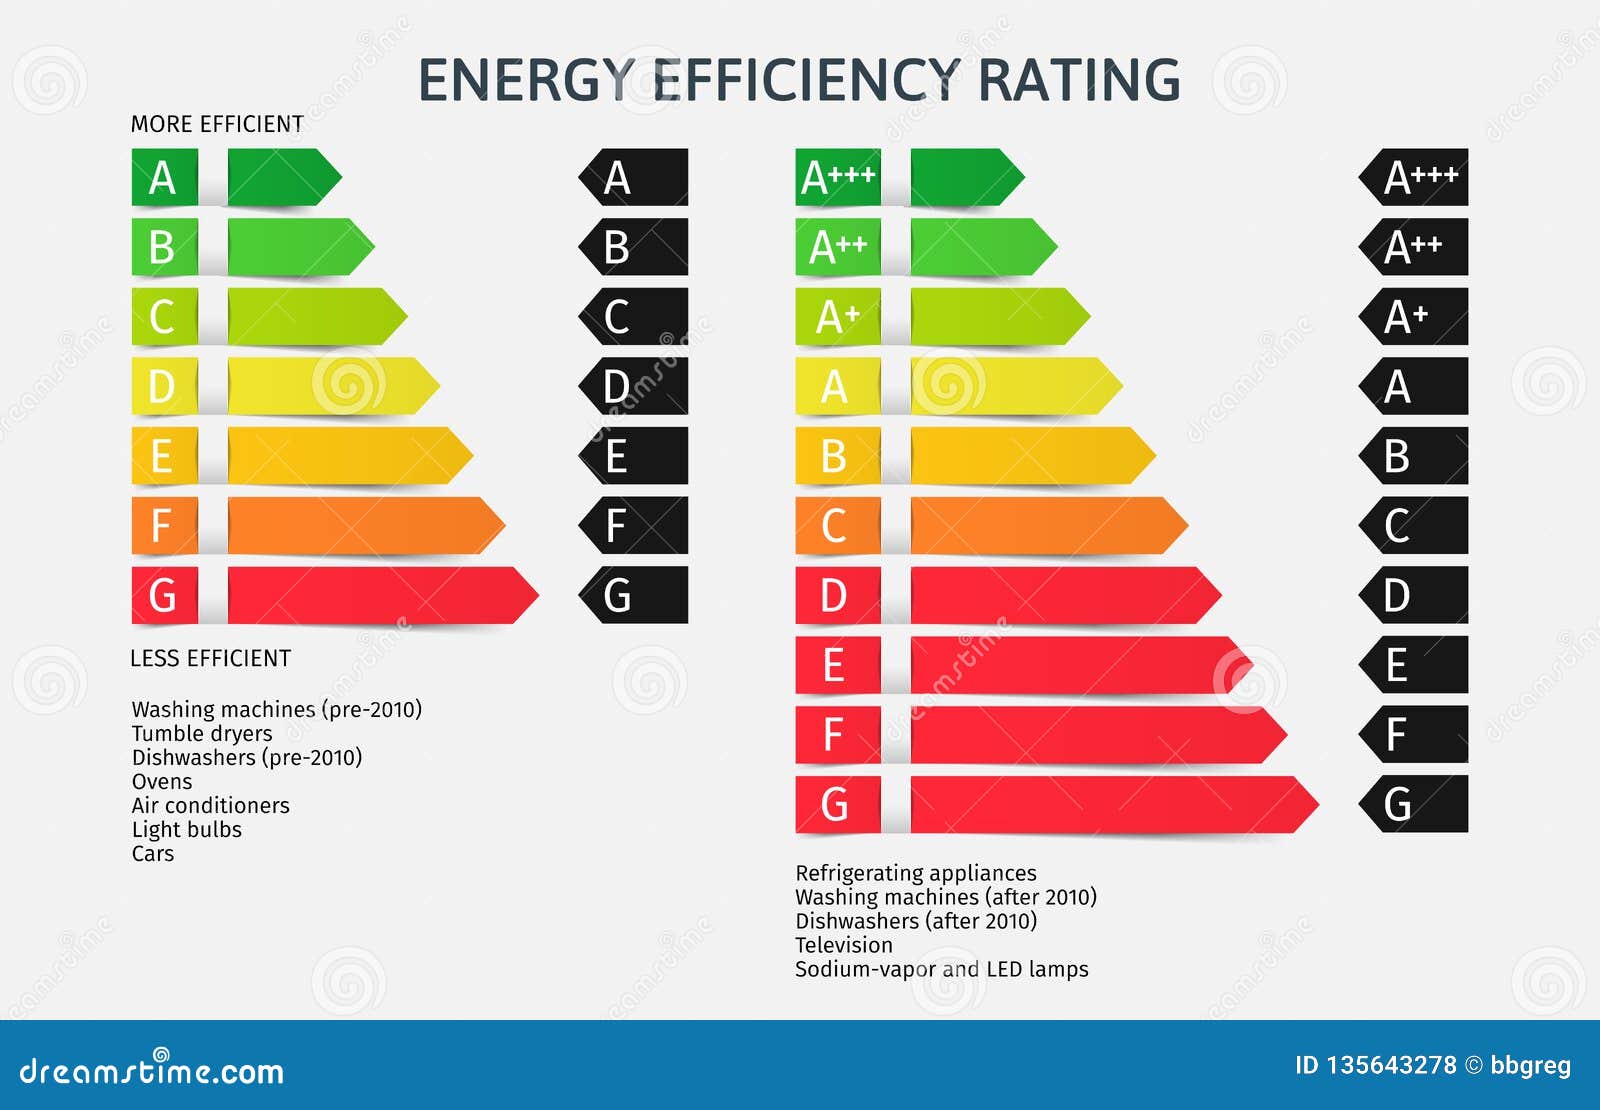 energy-efficiency-rating-classes-index-union-energy-label-vector